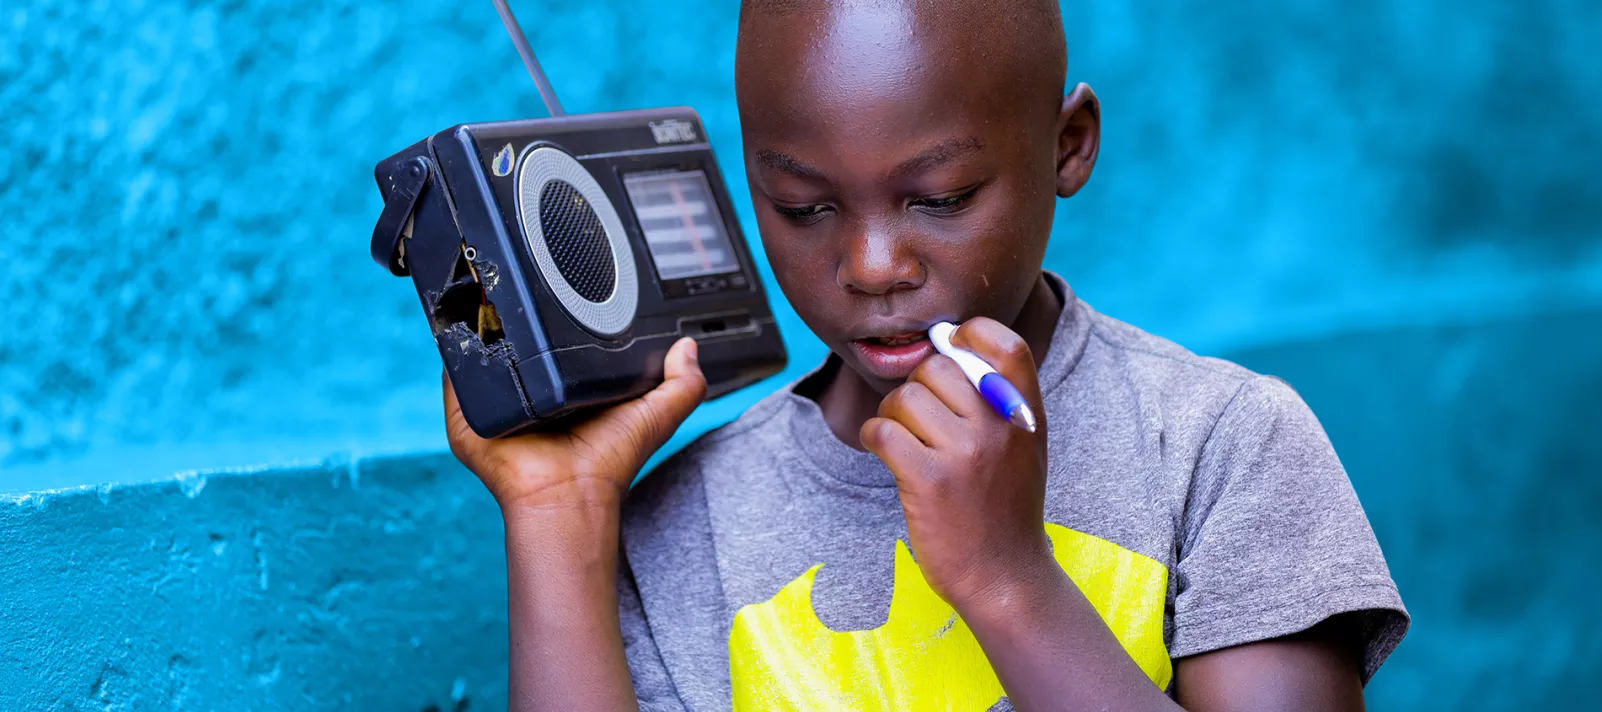 Igihozo Kevin, 11, studies at home due to coronavirus-related school closures, listening to his Primary 5 lessons on the radio every day.